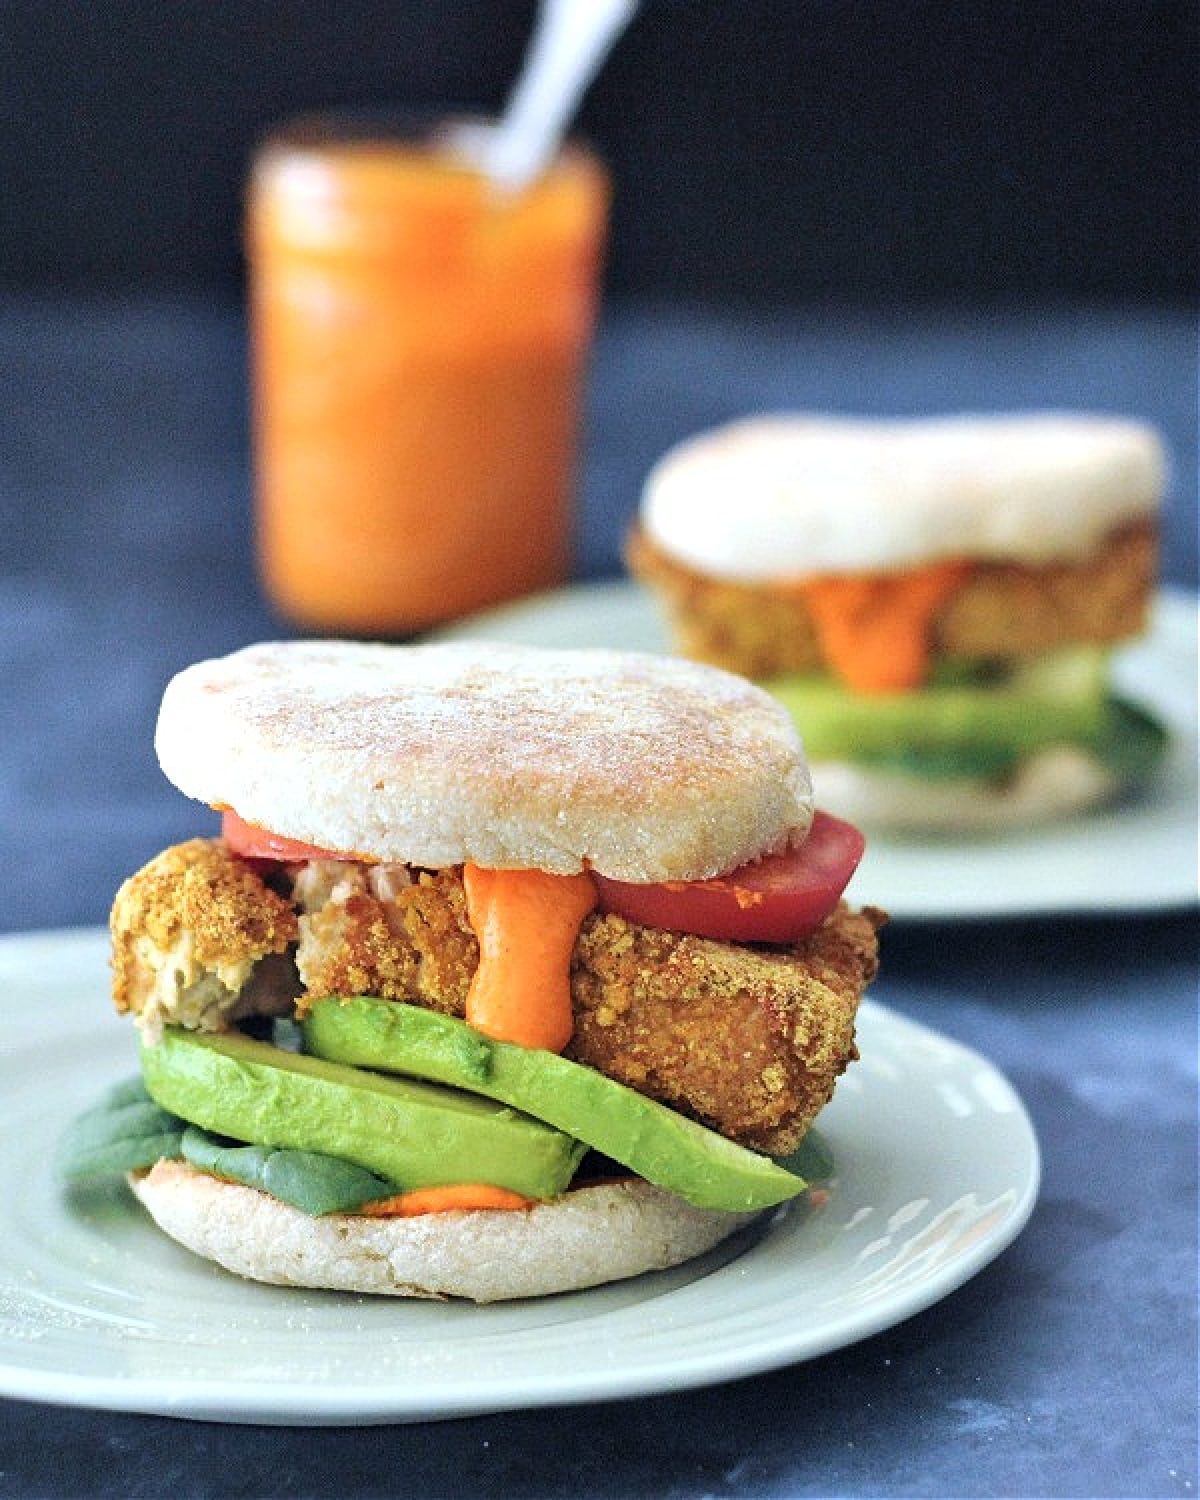 Two vegan breakfast sandwiches on white plates, side view shows stacked ingredients (Romesco sauce, spinach, tomato slices, vegan "egg" or tofu, avocado slices).